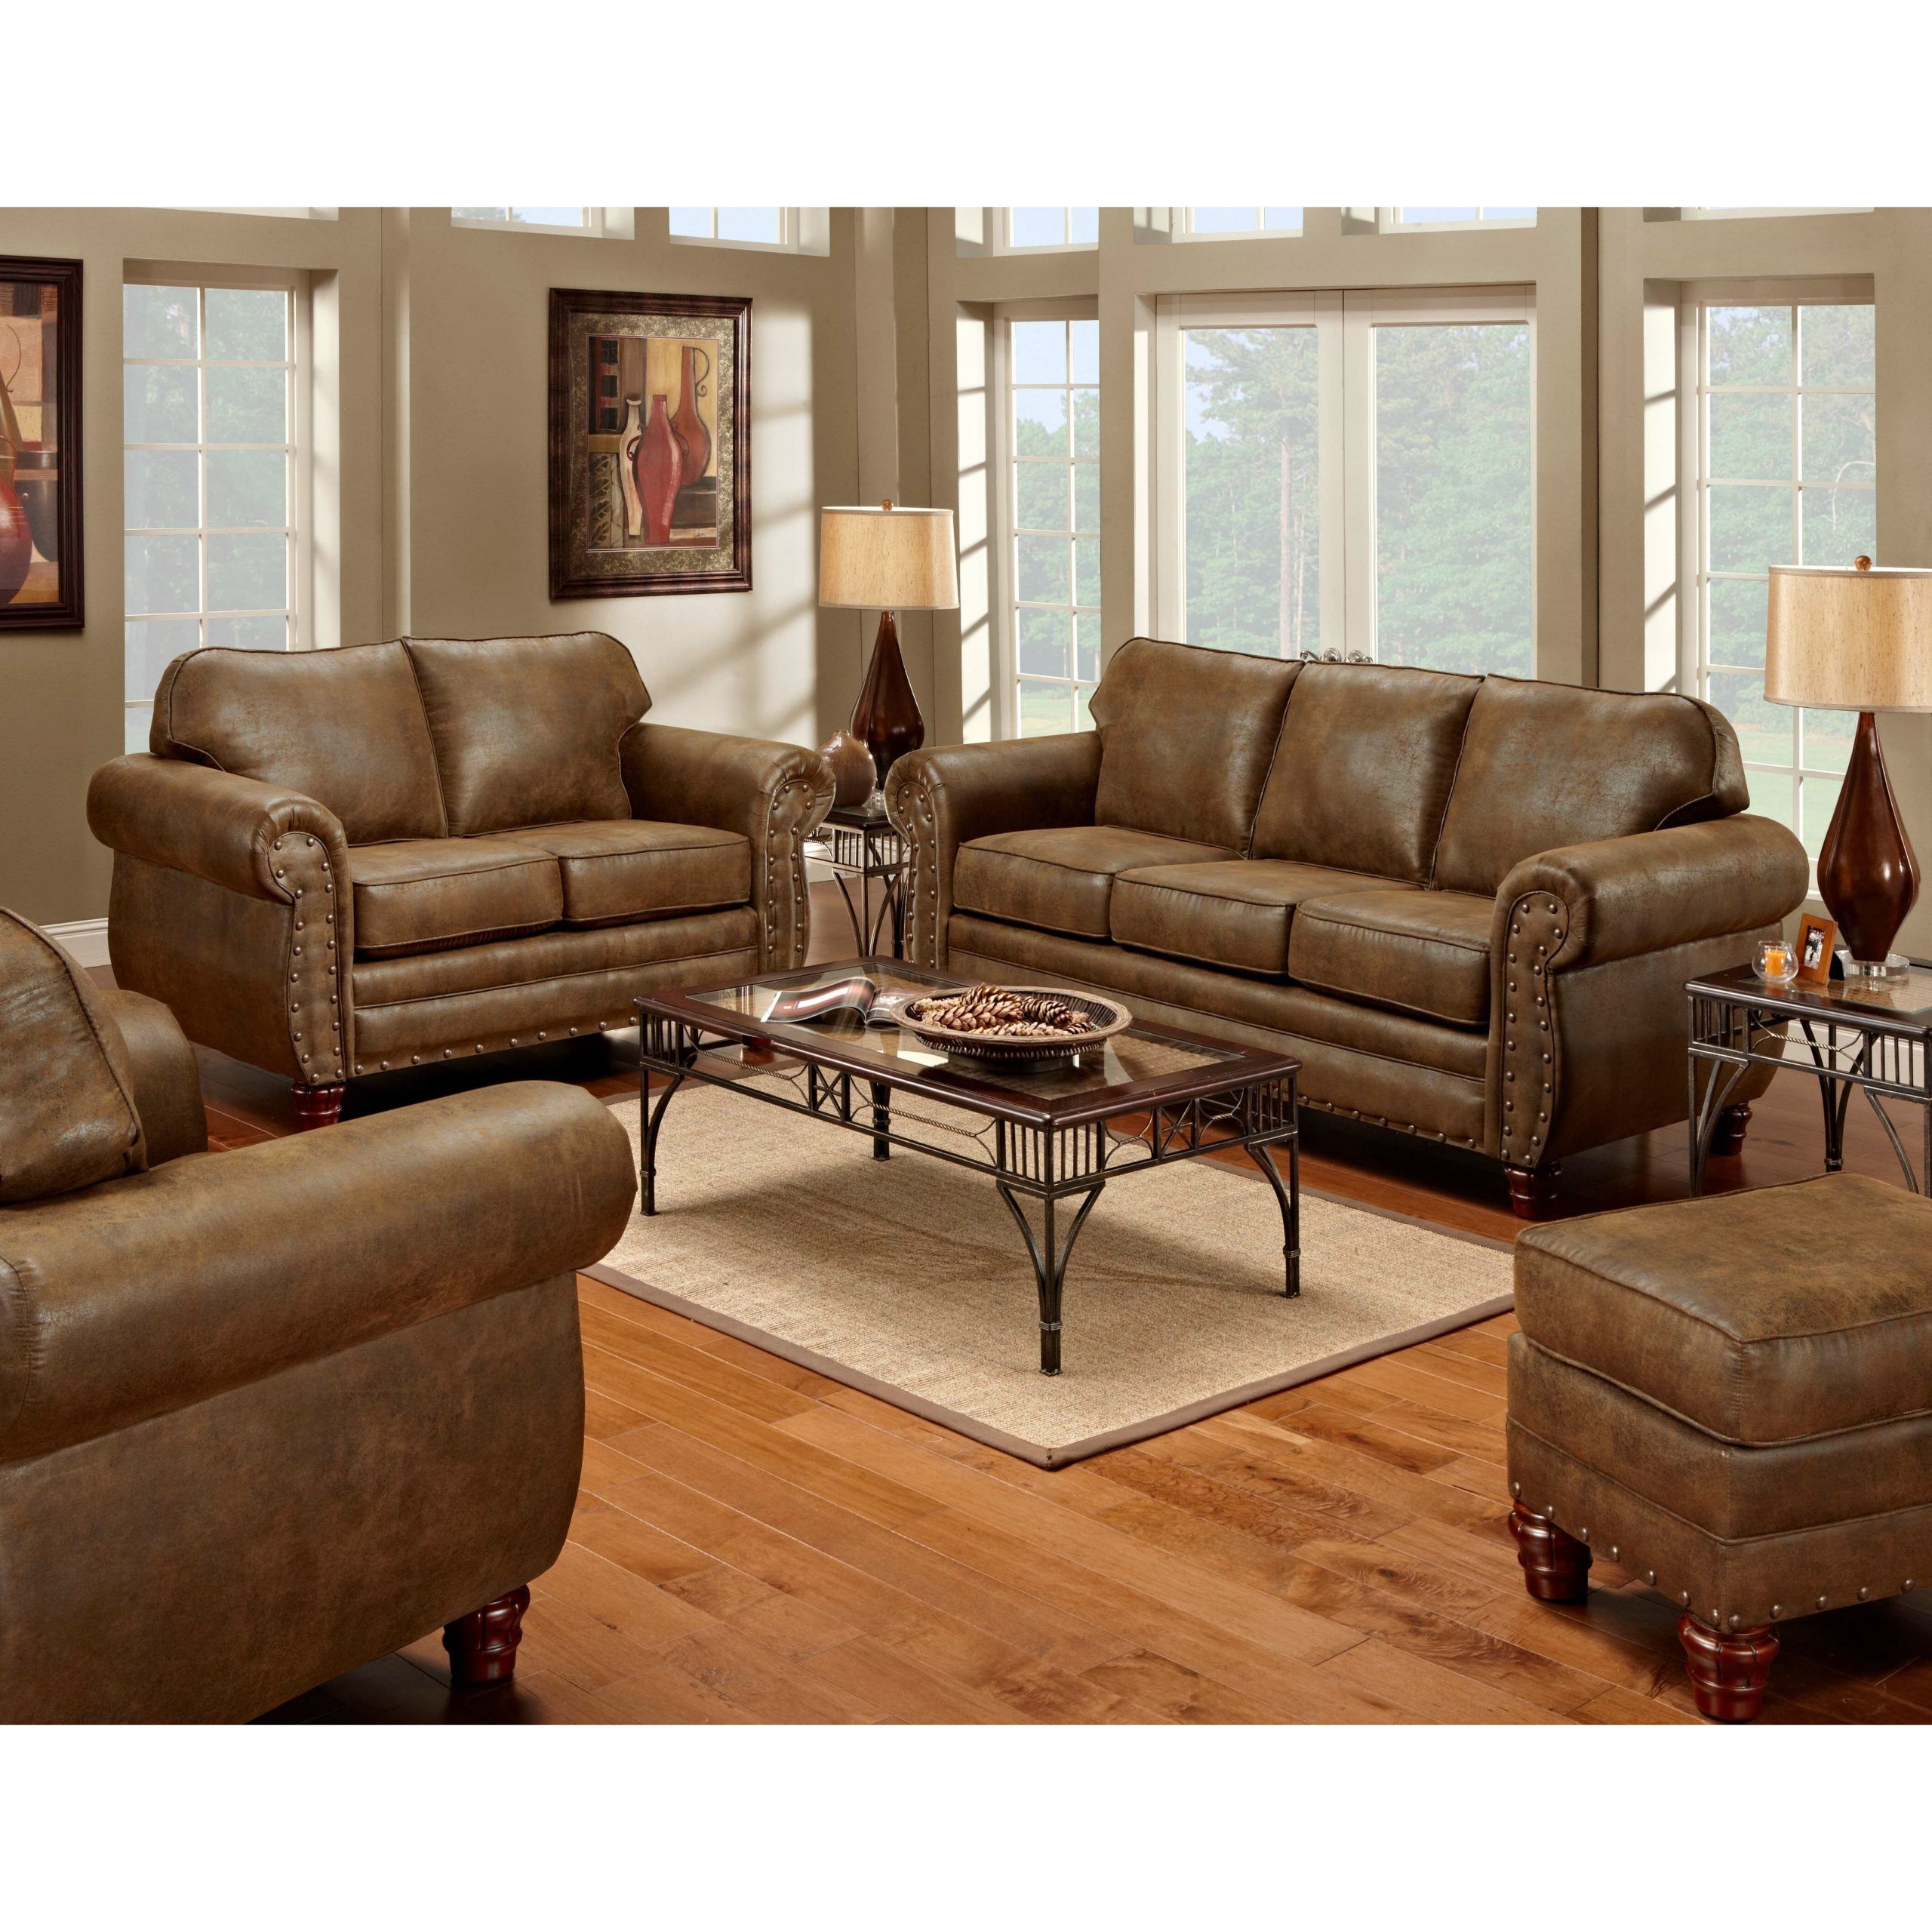 American Furniture Classics Sedona 4 Piece Living Room Set With Sleeper Pertaining To Sofas For Living Rooms (View 8 of 20)